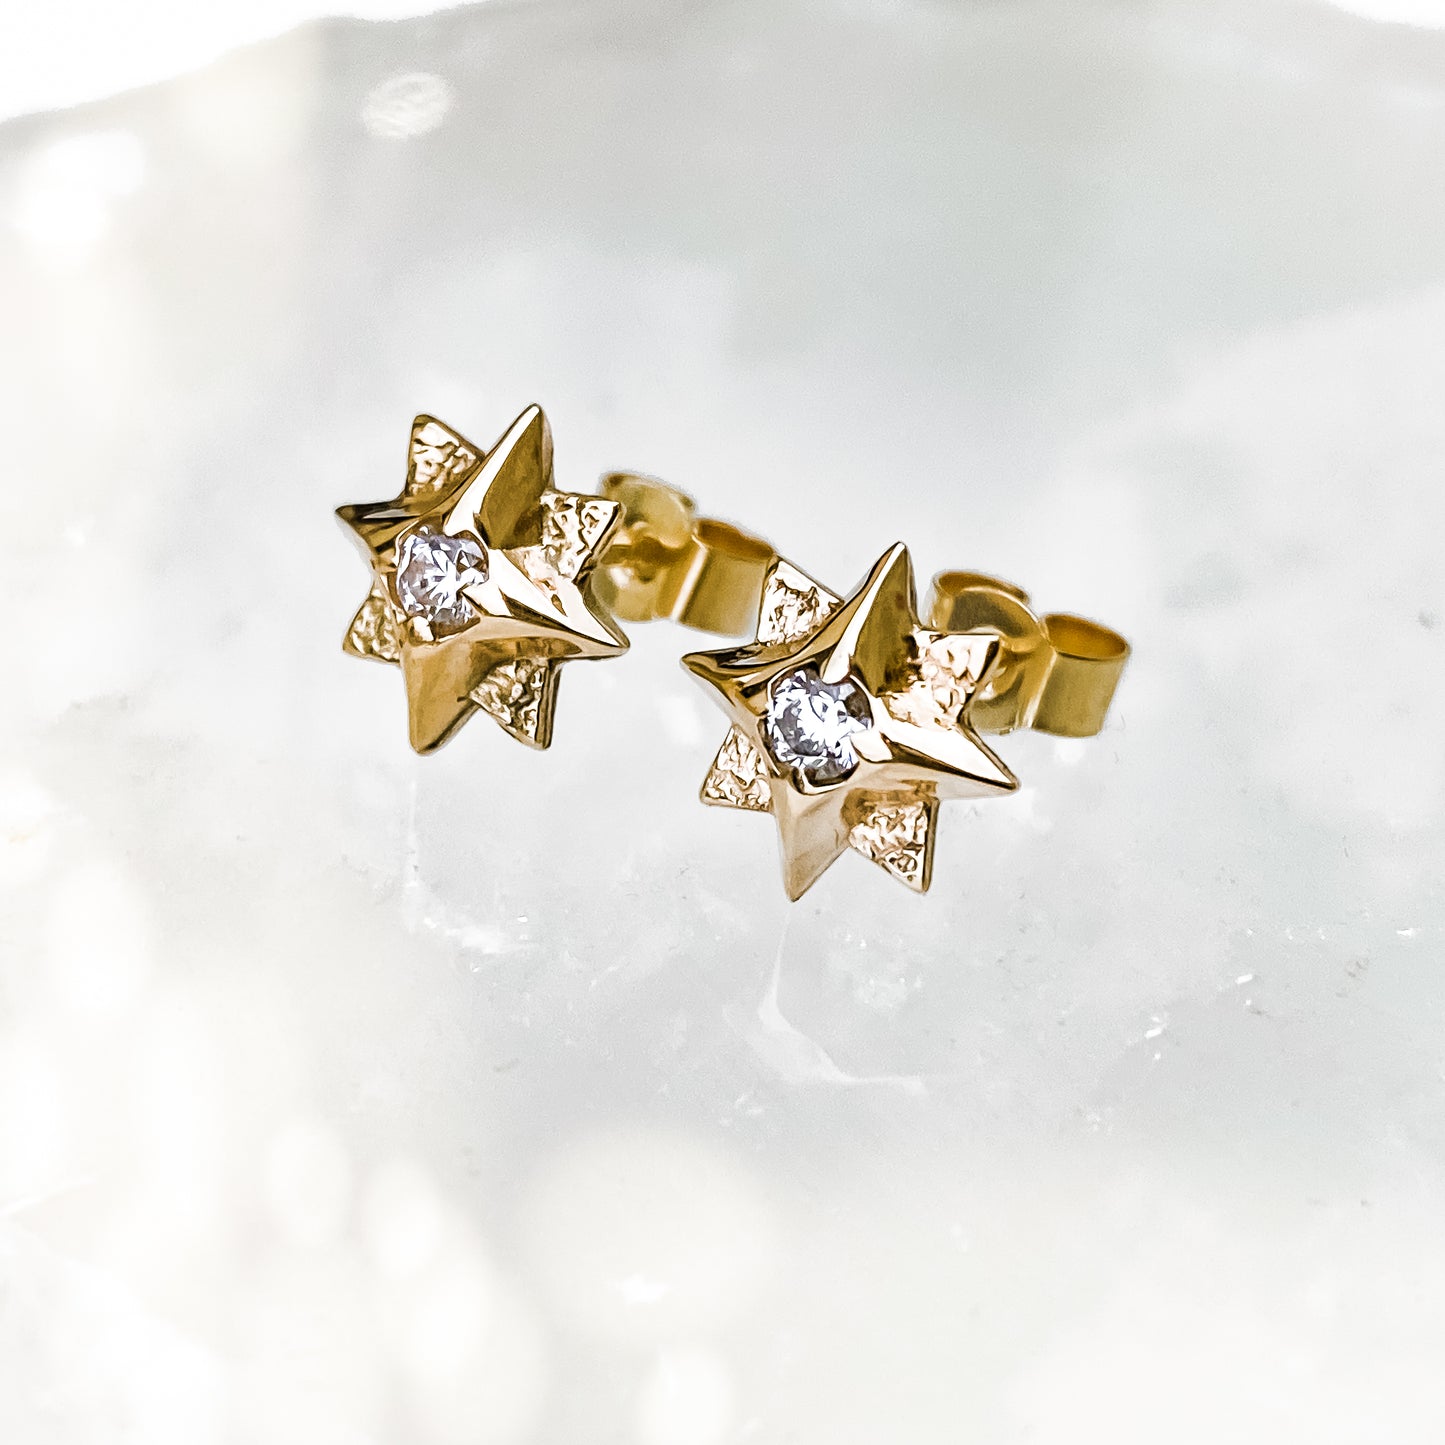 Gold North Star Stud Earrings with Moissanite